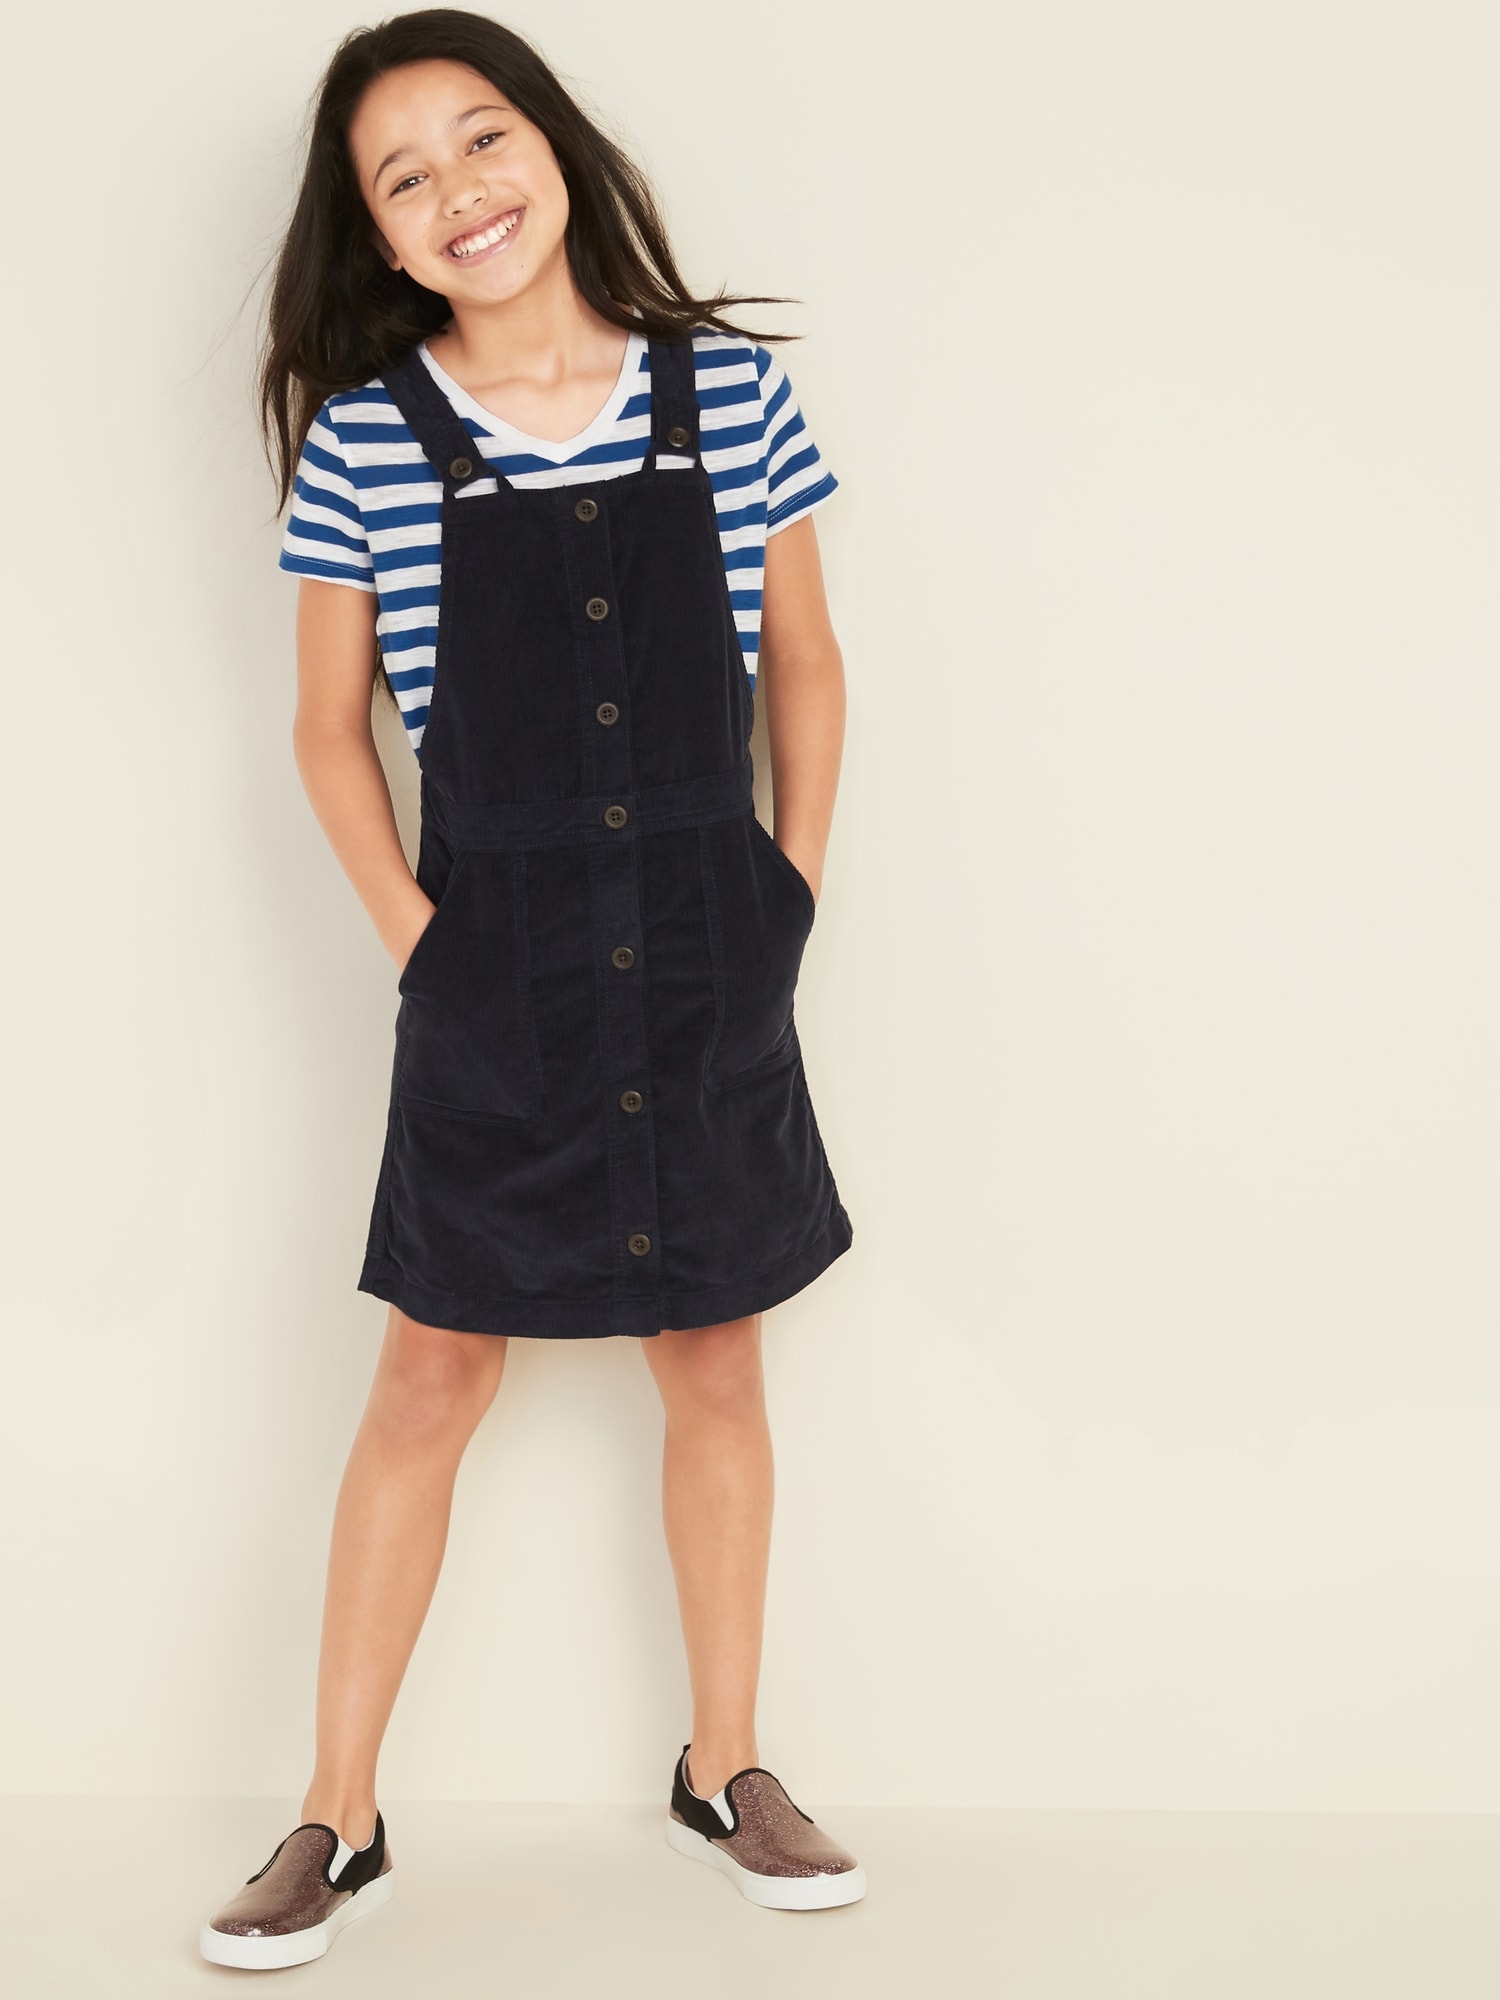 Corduroy Overall Uniform Jumper for Girls | Old Navy